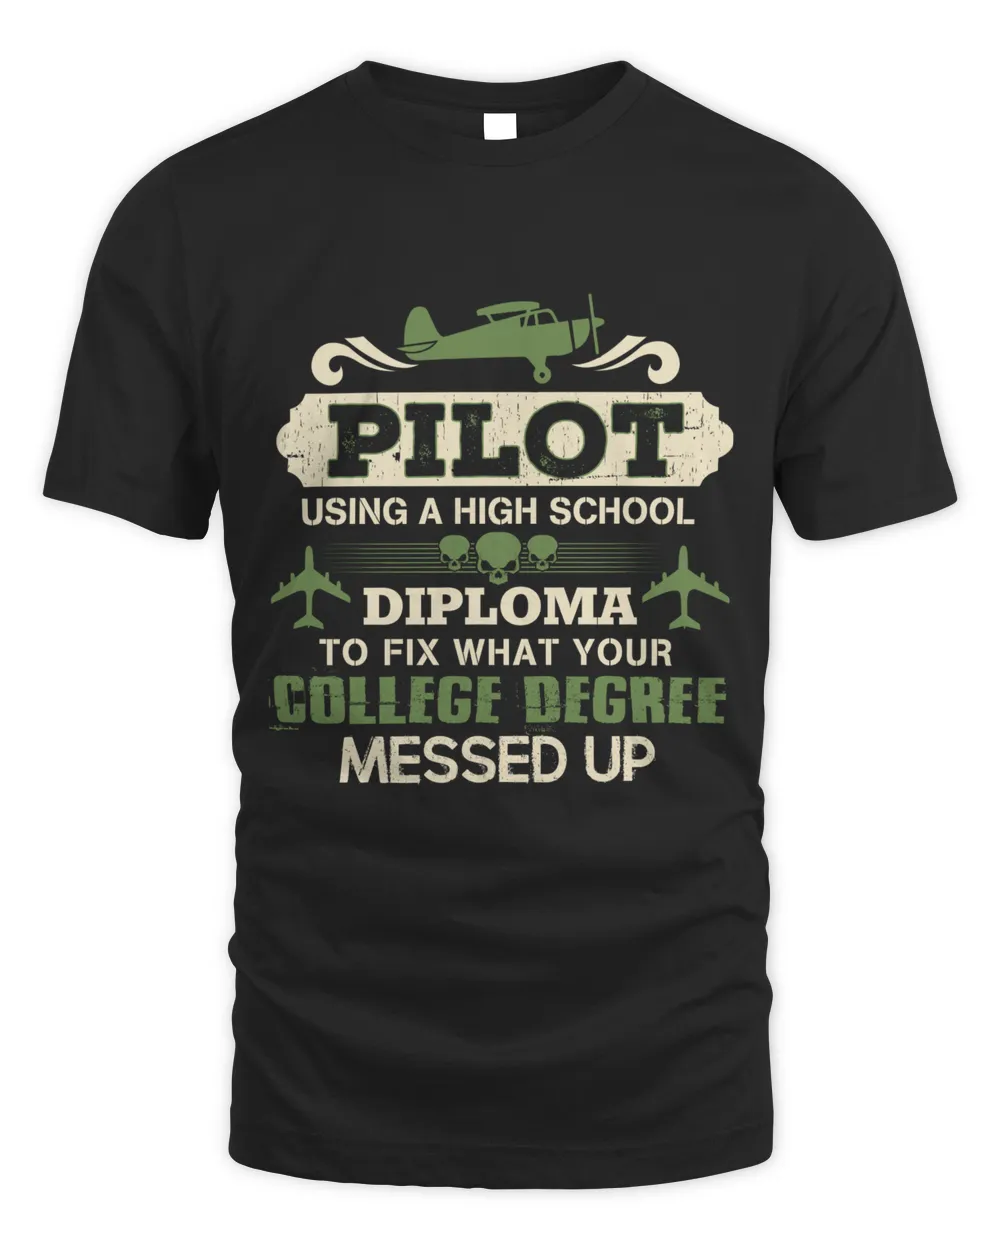 Pilot using a high school diploma to fix what your college degree messed up